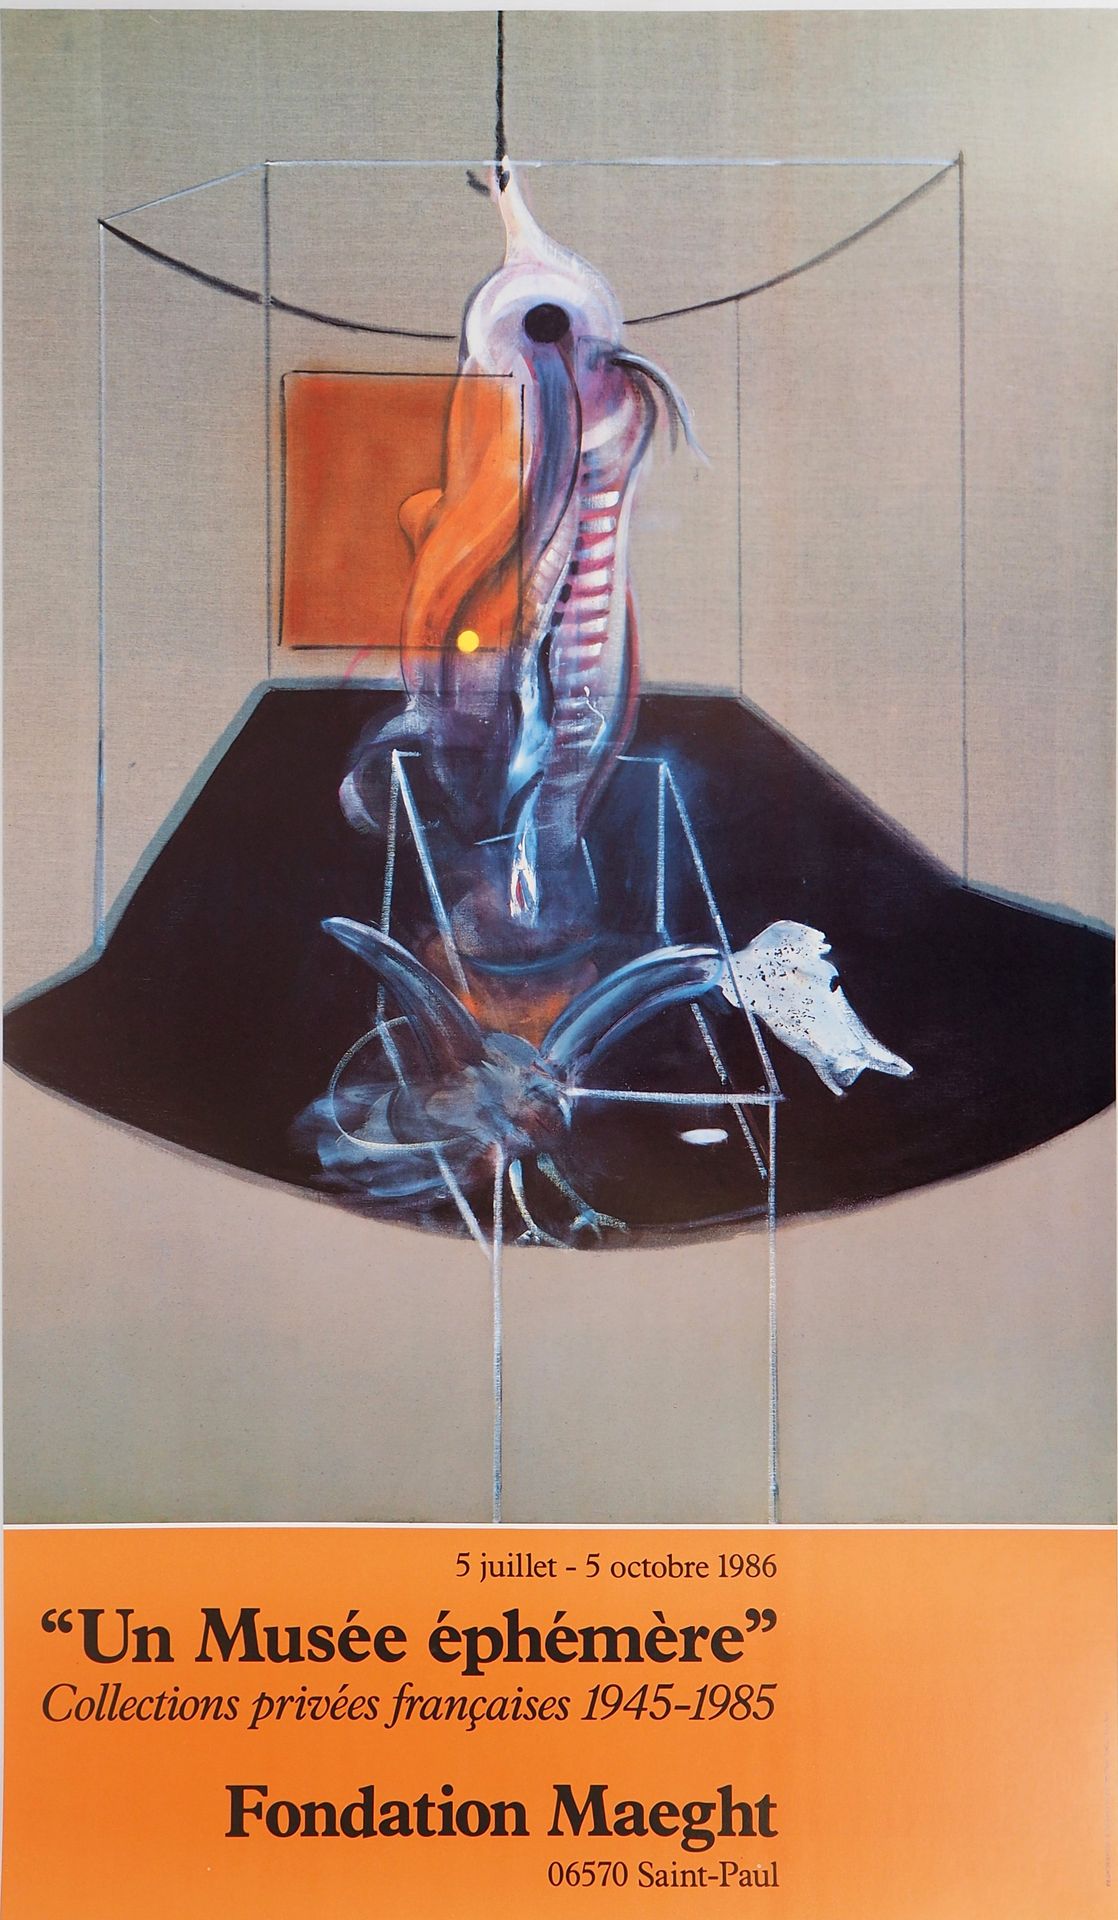 FRANCIS BACON Francis Bacon (after)

Meat carcass and pray bird, 1986

Original &hellip;